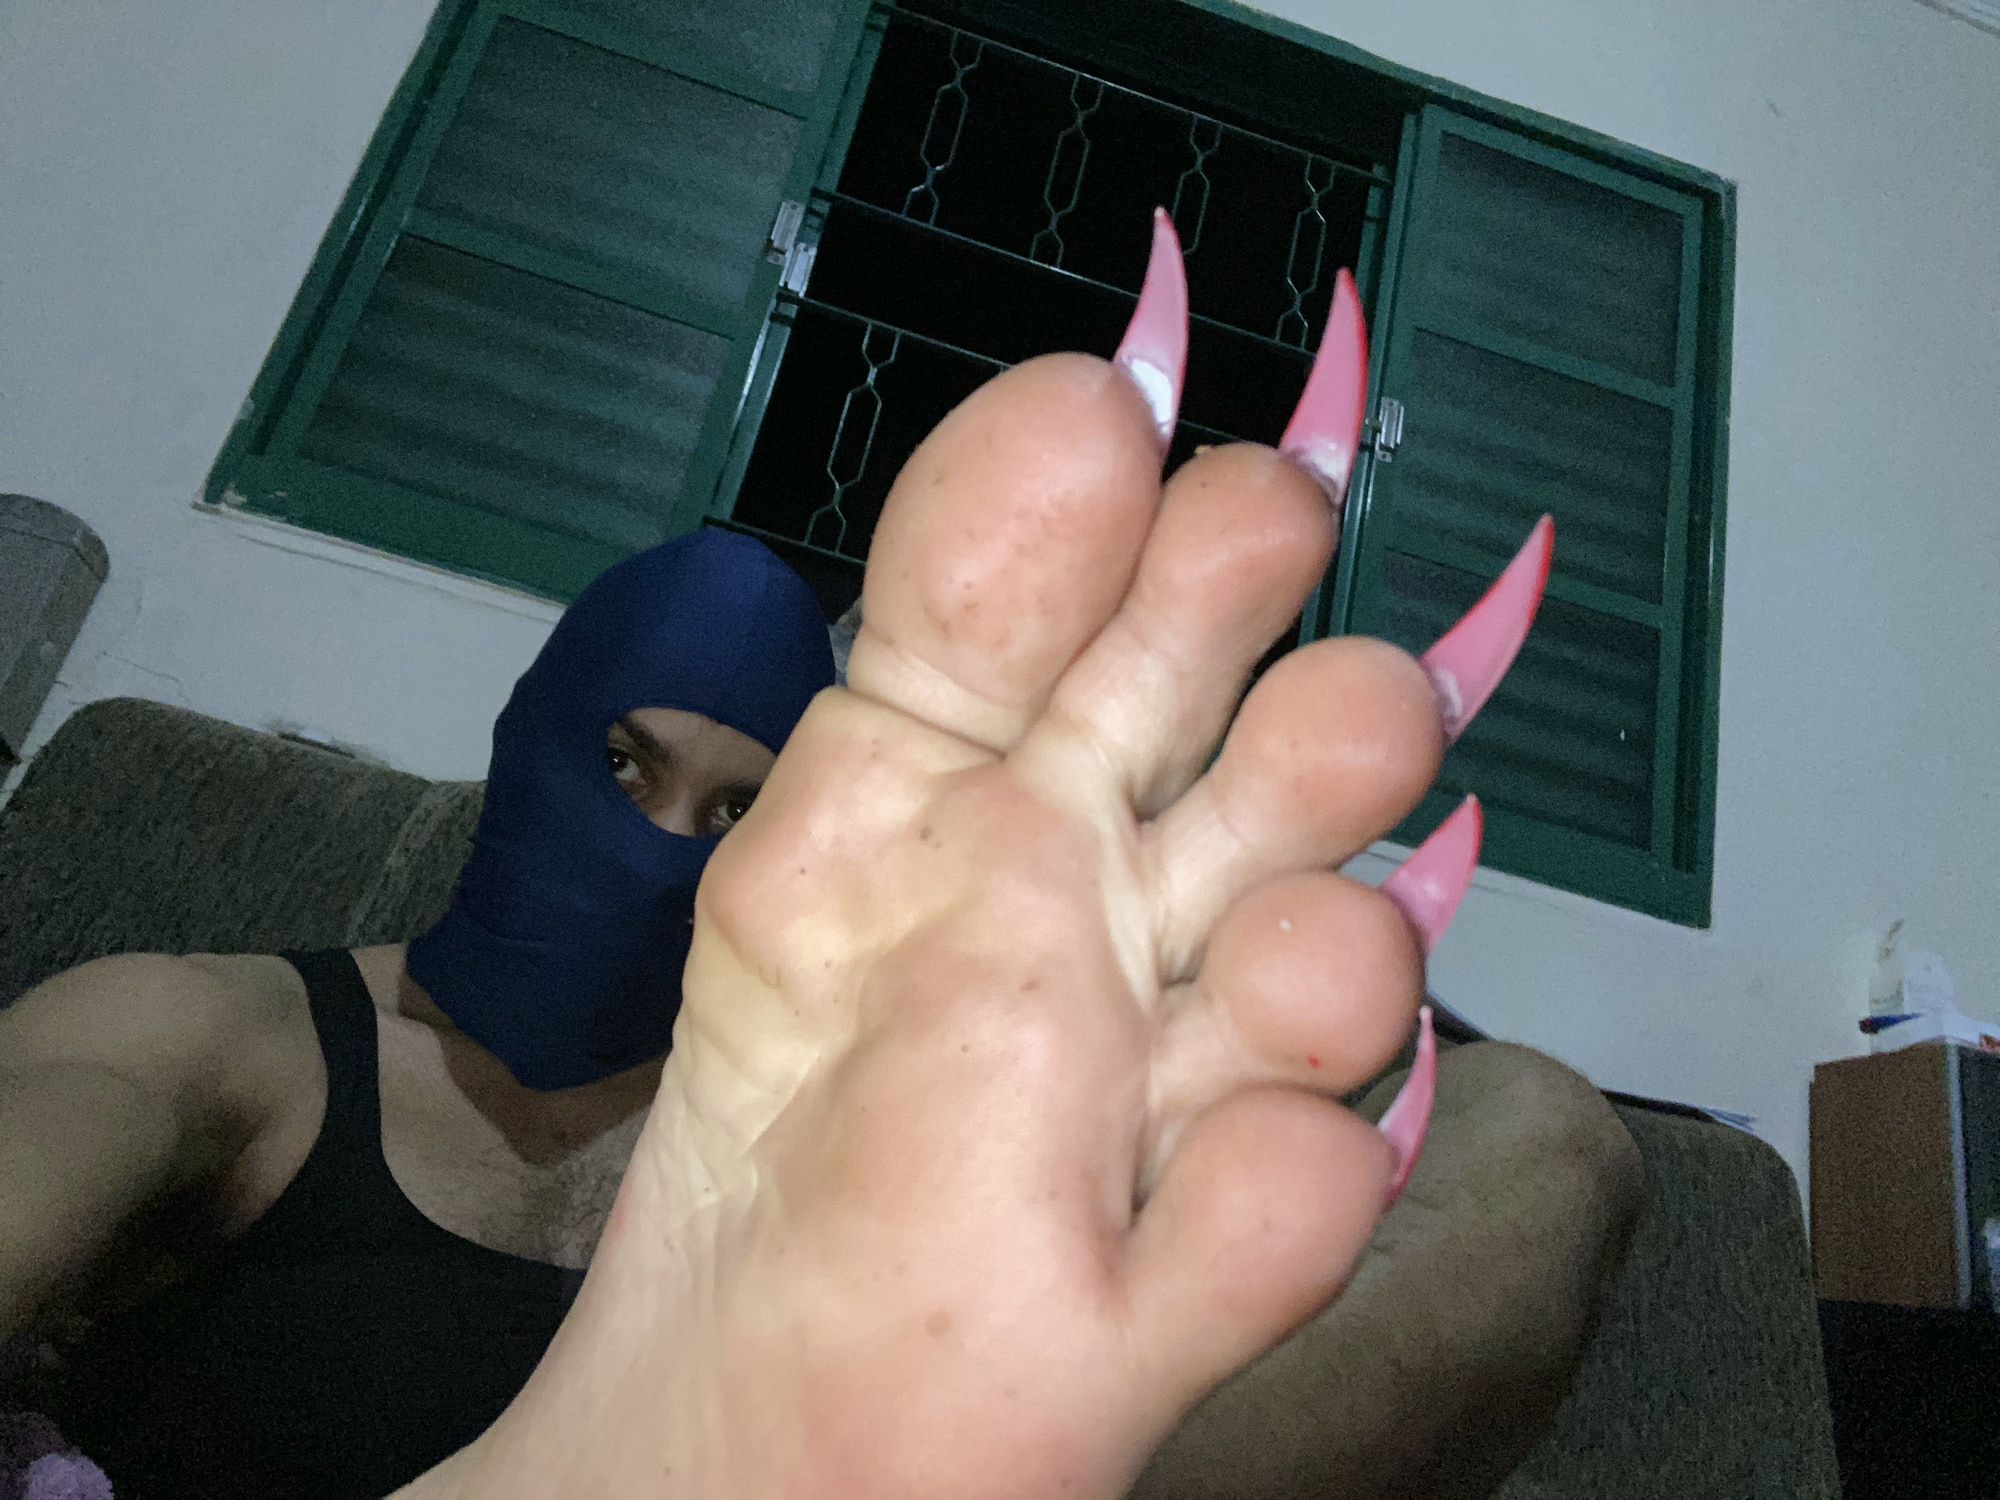 Some old pictures of my feet with long toenails, sandals... #27